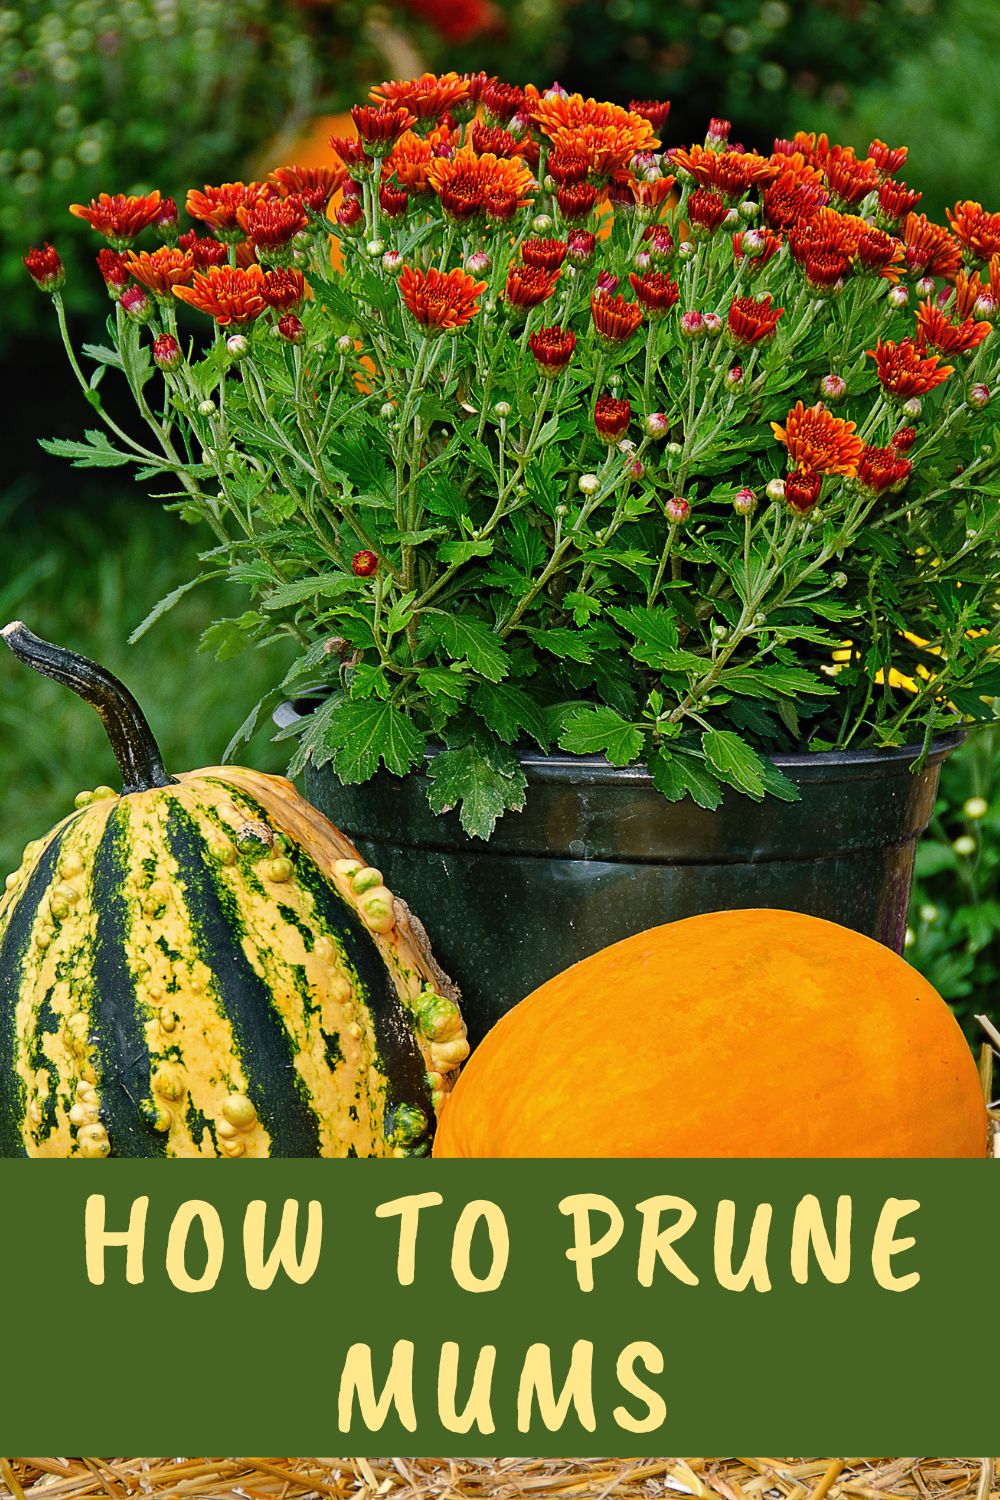 How to prune mums.